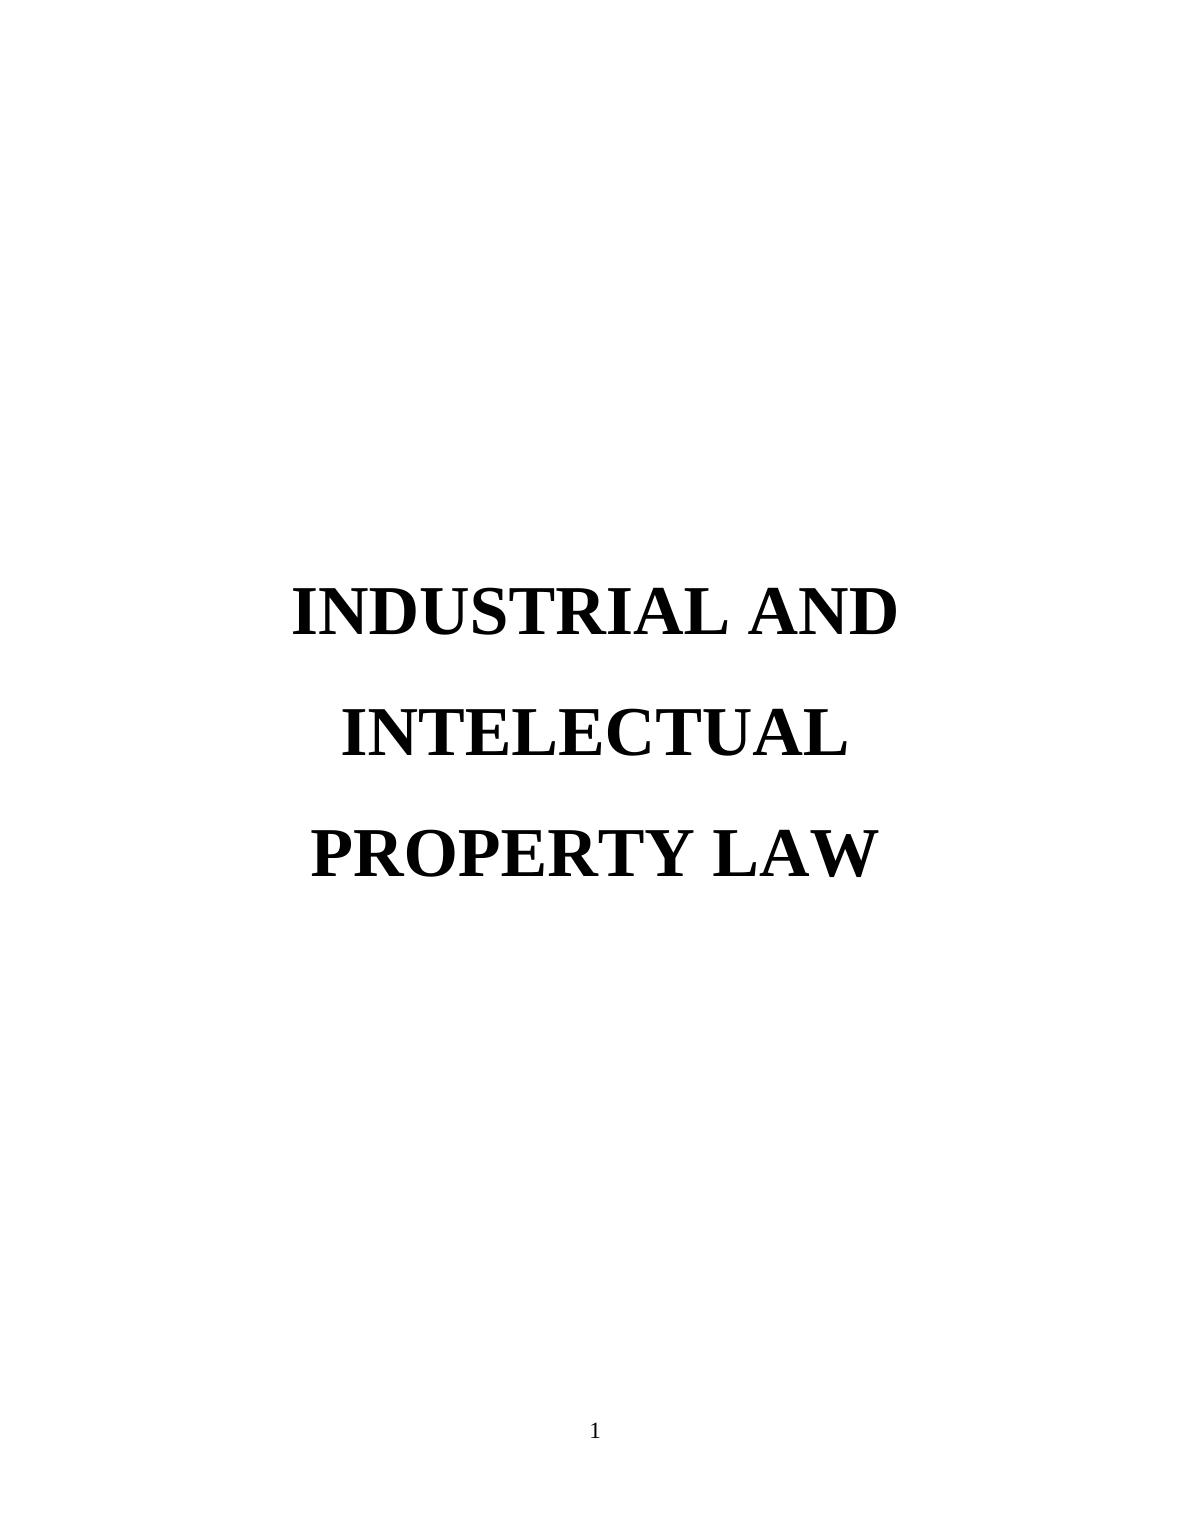 Industrial and Intellectual Property Law_1